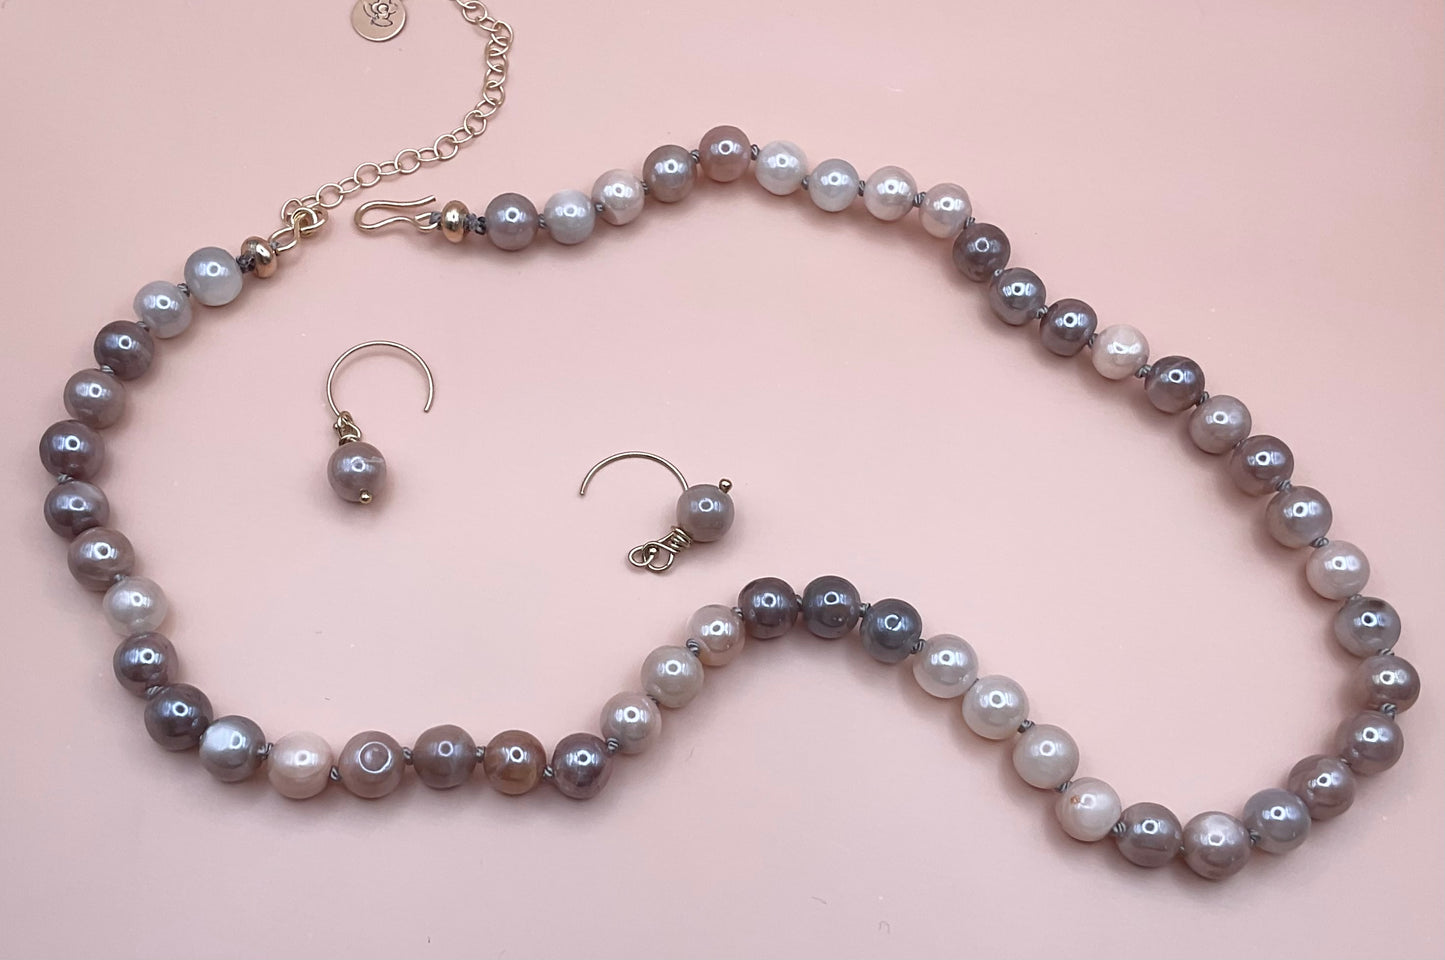 Hand-knotted Peach and Gray Moonstone Necklace with Matching Earrings